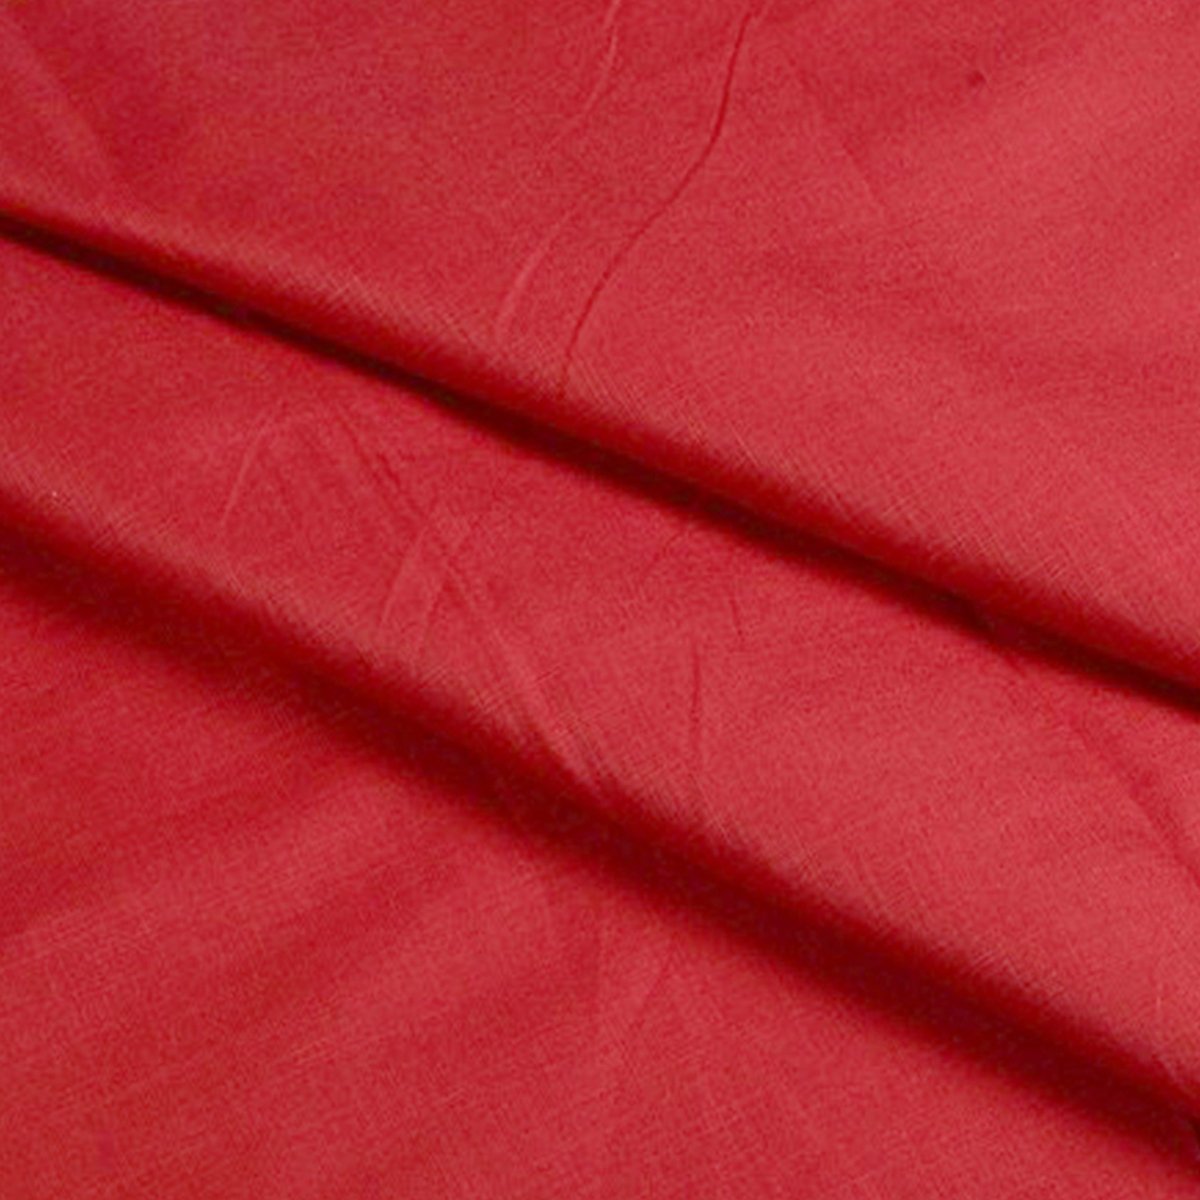 Buy Cotton Cloth for Puja | Red Pooja Cloth | Pooja Cotton Cloth (1 Meter) online